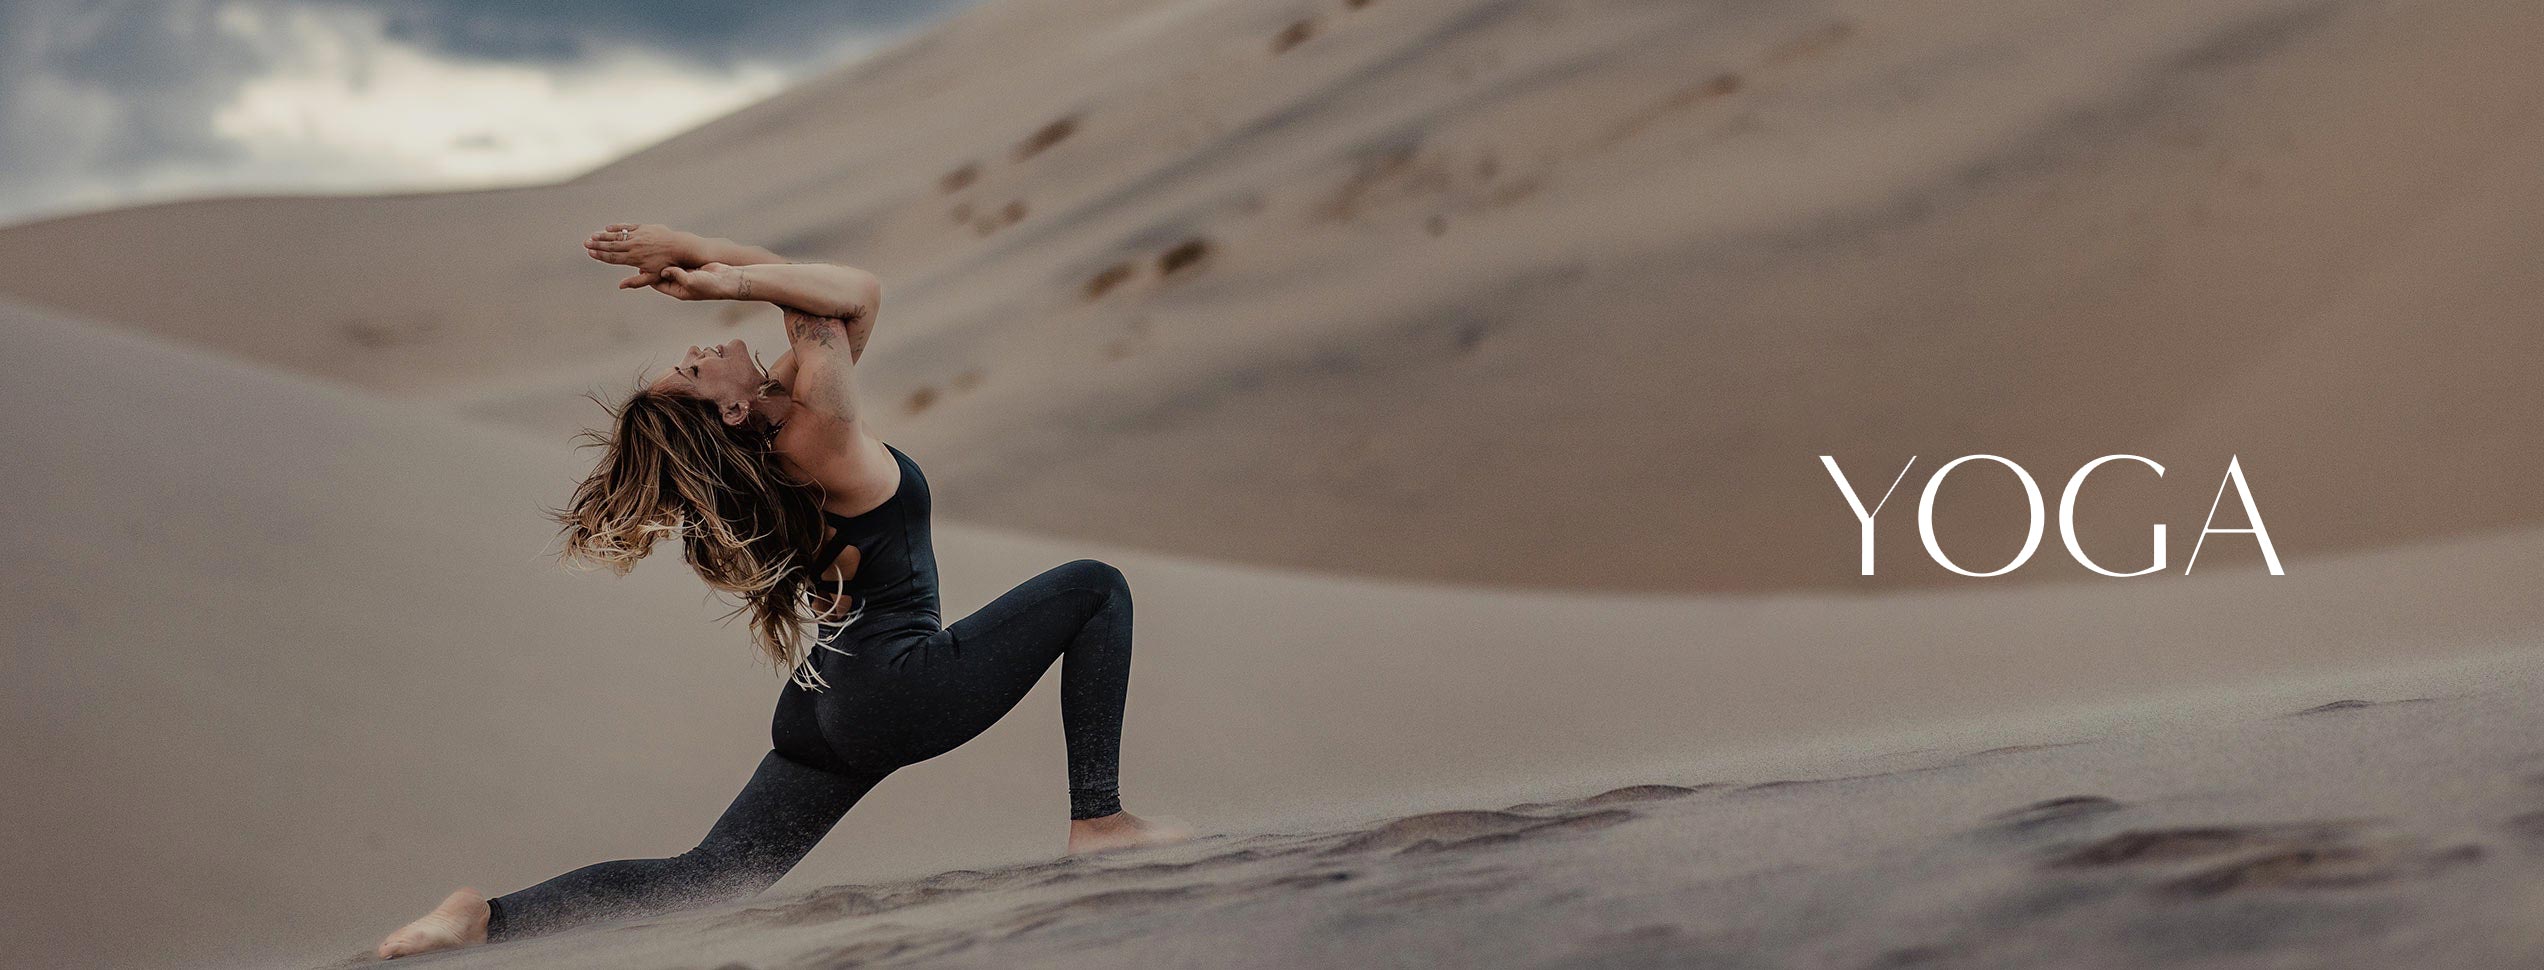 model doing yoga in a bodysuit in the middle of sand dunes